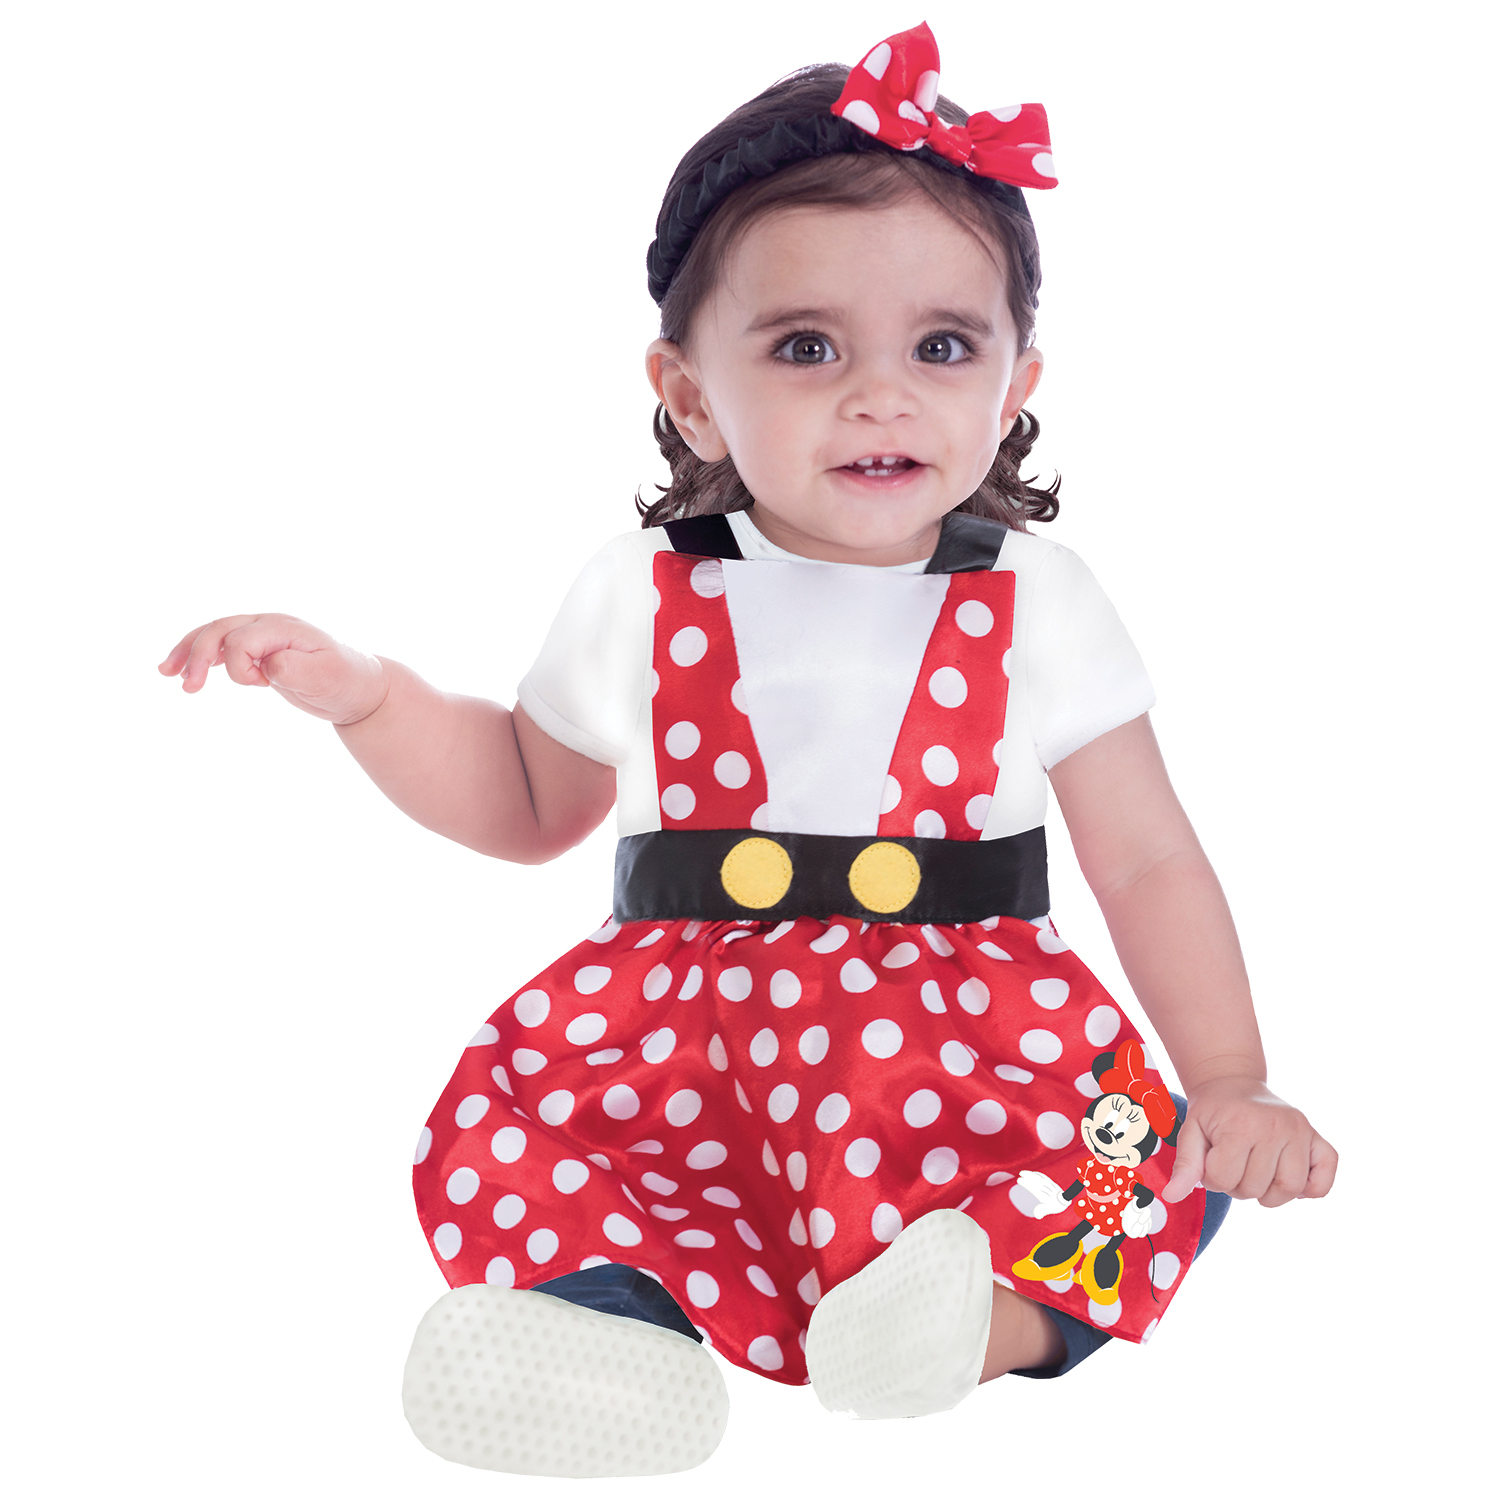 Disney Baby Minnie Mouse Dress Up Pinafore 1-2Years (80-92cm) RRP £14.99 CLEARANCE XL £2